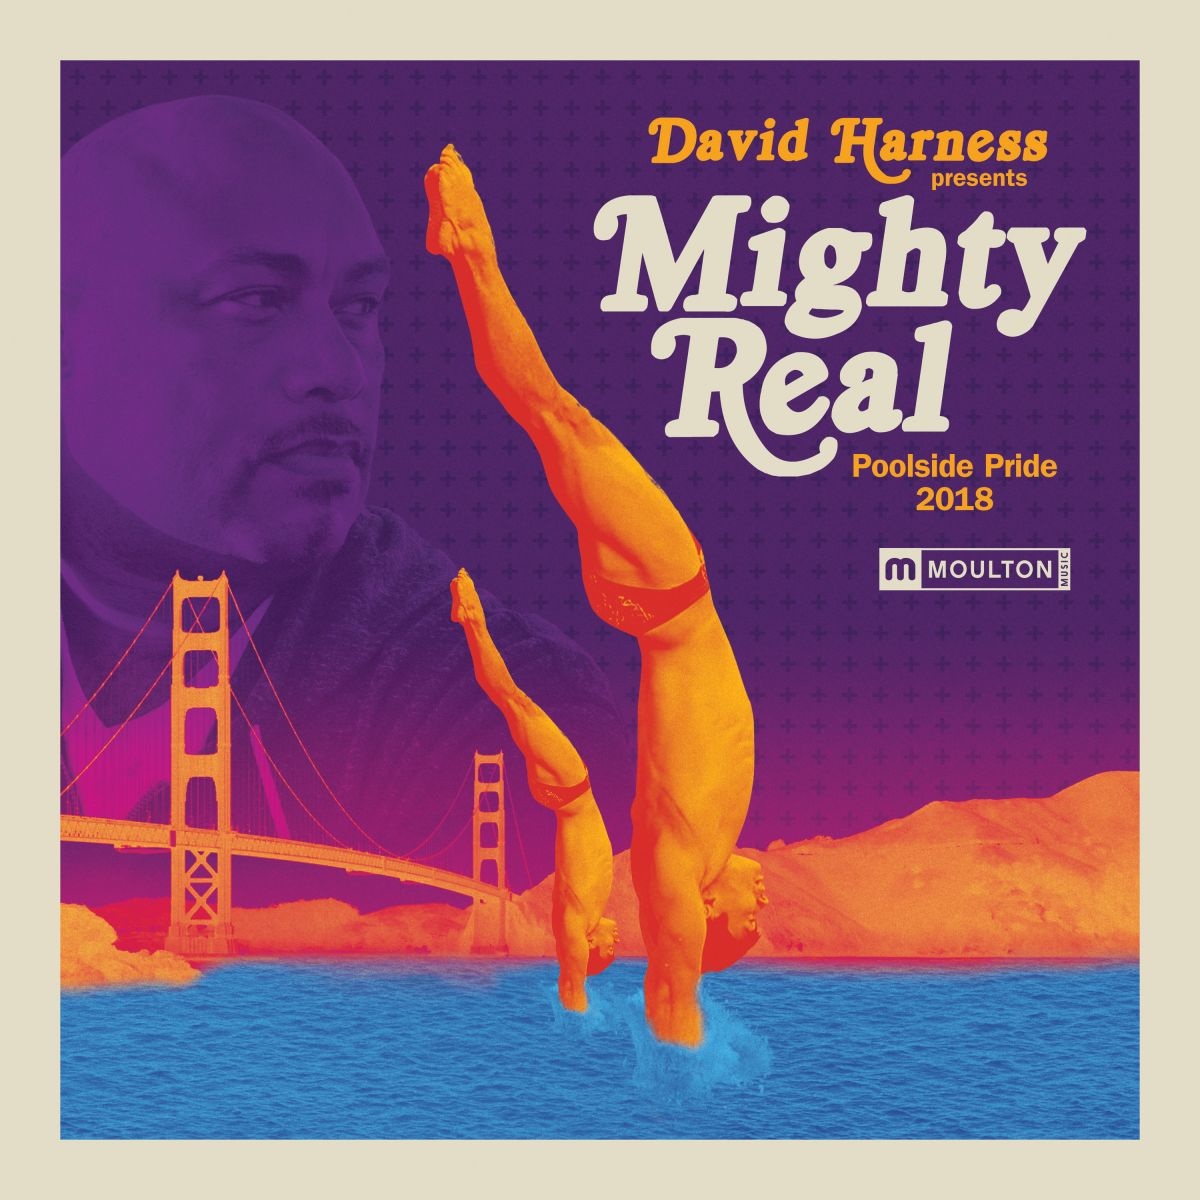 David Harness - Mighty Real Poolside Pride 2018 / Moulton Music